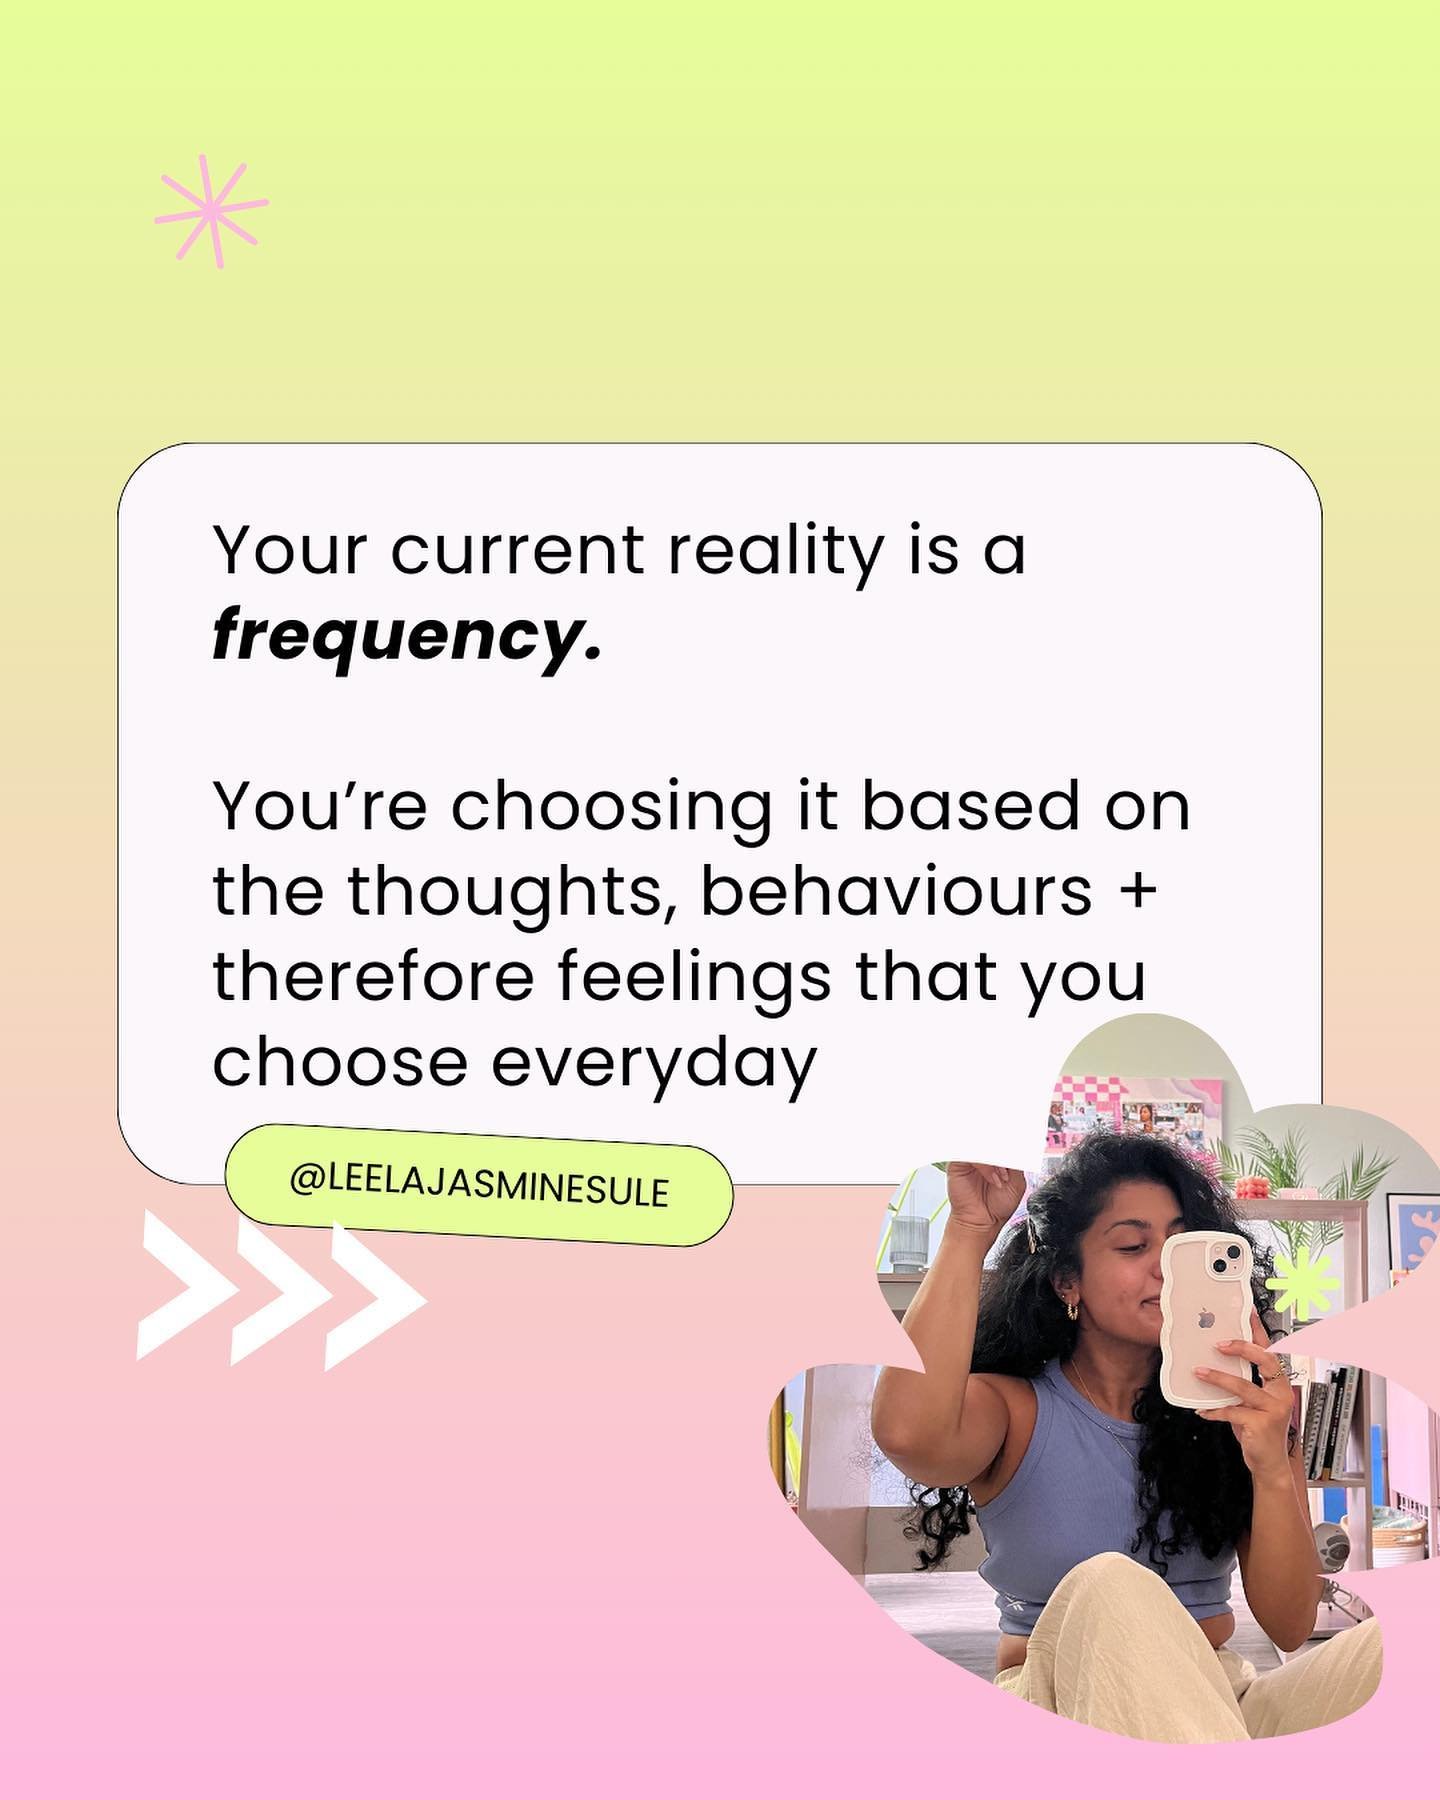 Your current reality is a frequency. 

You&rsquo;re choosing it based on the thoughts, behaviours + therefore feelings that you choose everyday 

This means lucky girl life where you&rsquo;re living in a state of joy and magic as things keep manifest